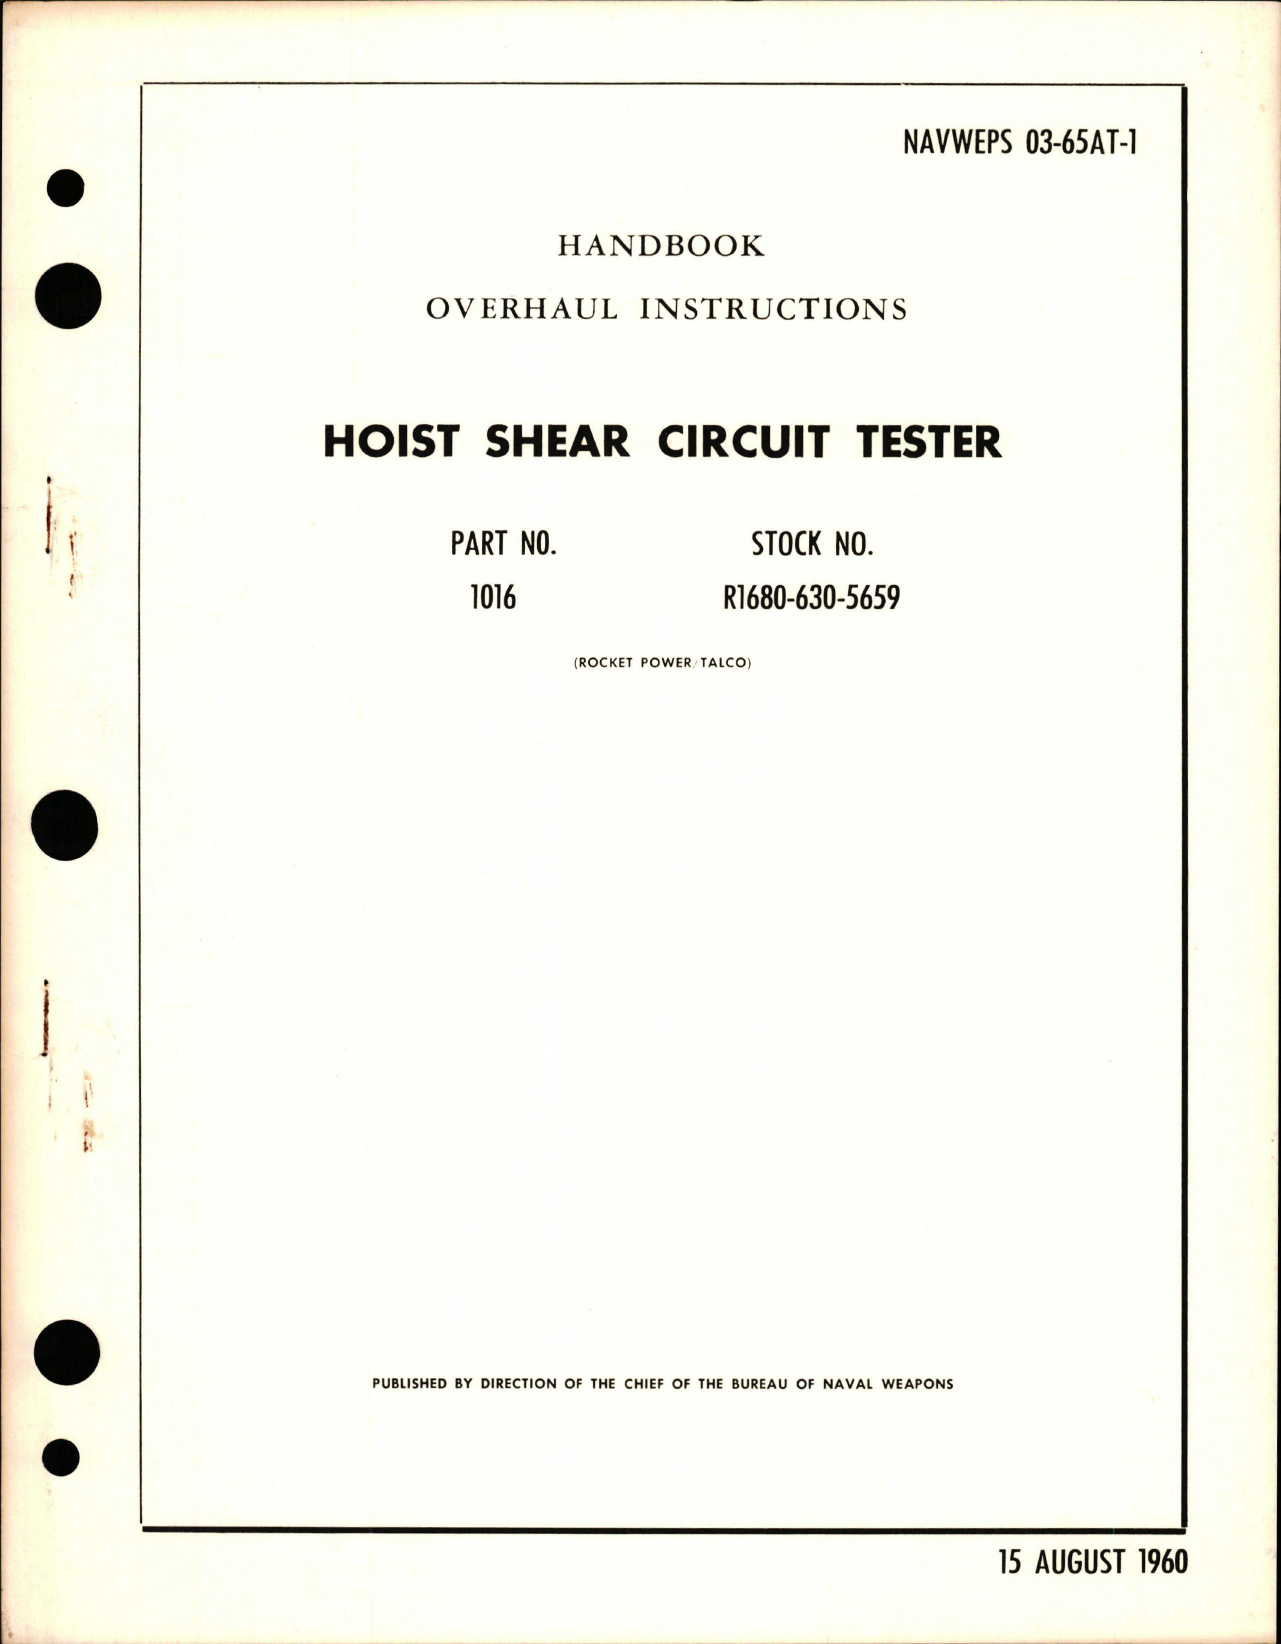 Sample page 1 from AirCorps Library document: Overhaul Instructions for Hoist Shear Circuit Tester - Part 1016 